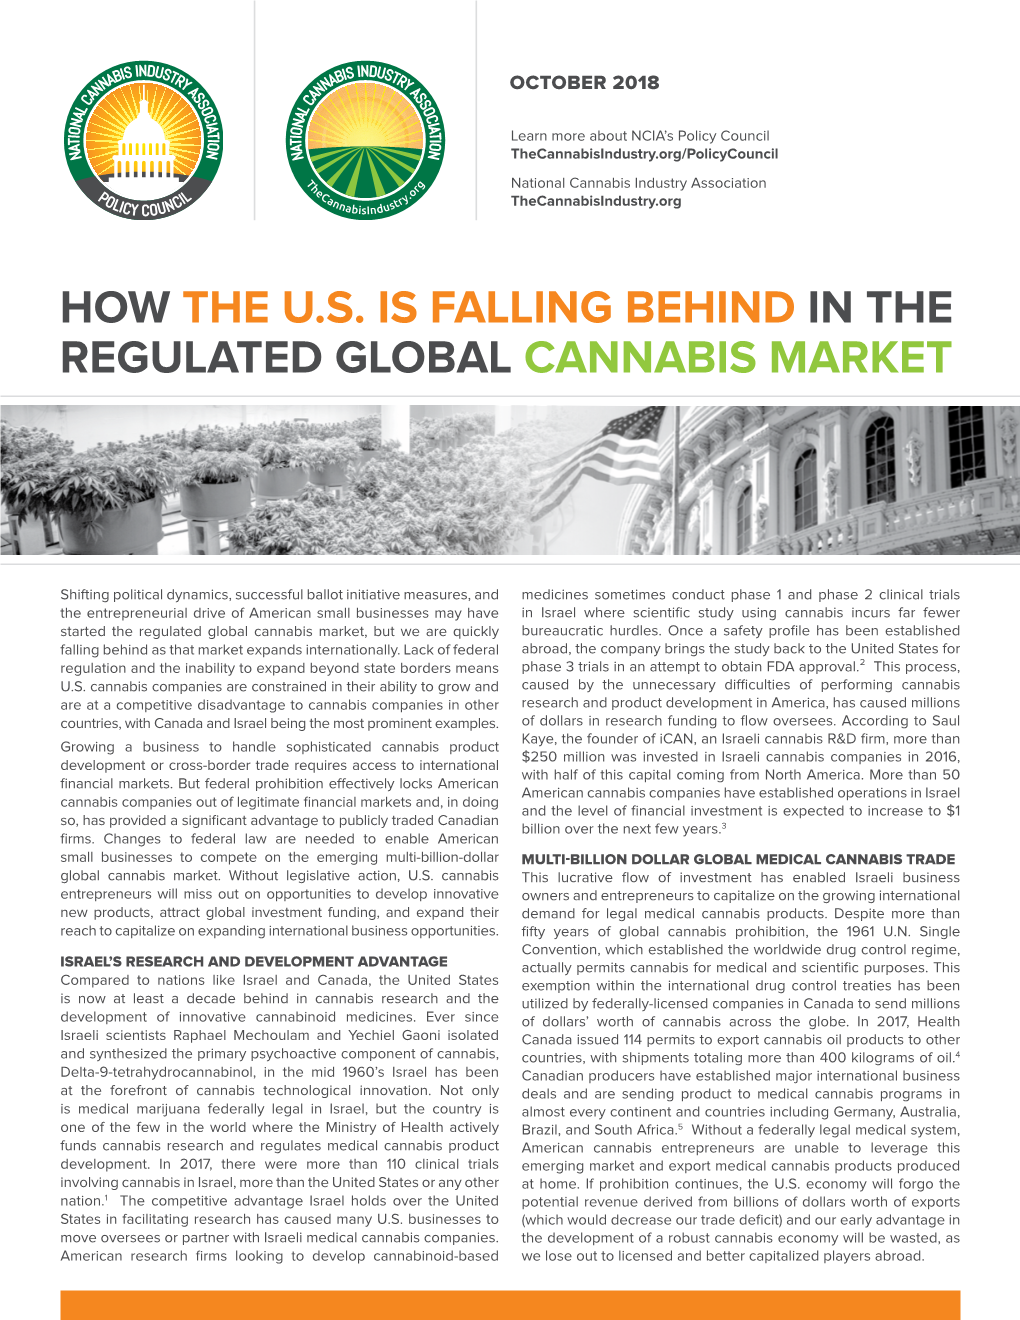 How the U.S. Is Falling Behind in the Regulated Global Cannabis Market